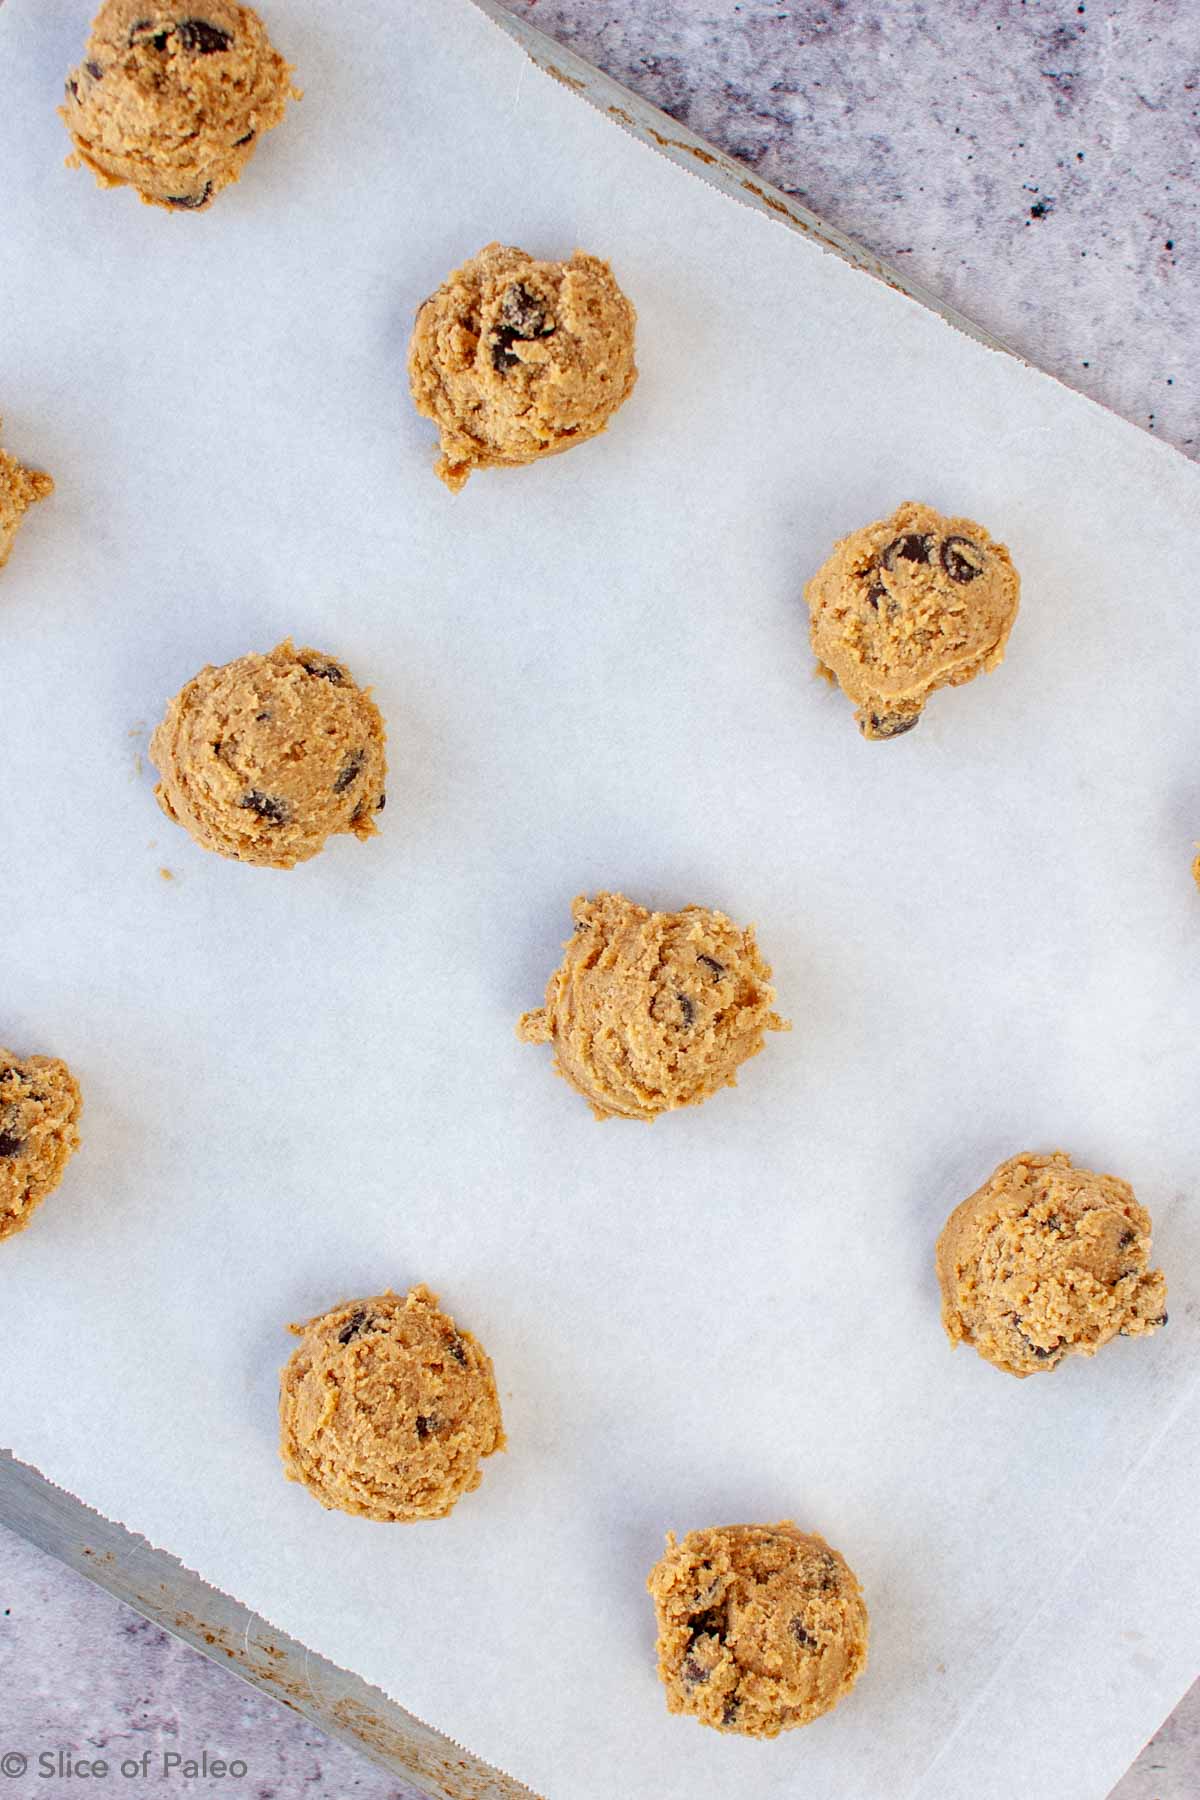 Paleo Chocolate Chip Cookies dough balls on a cookies sheet